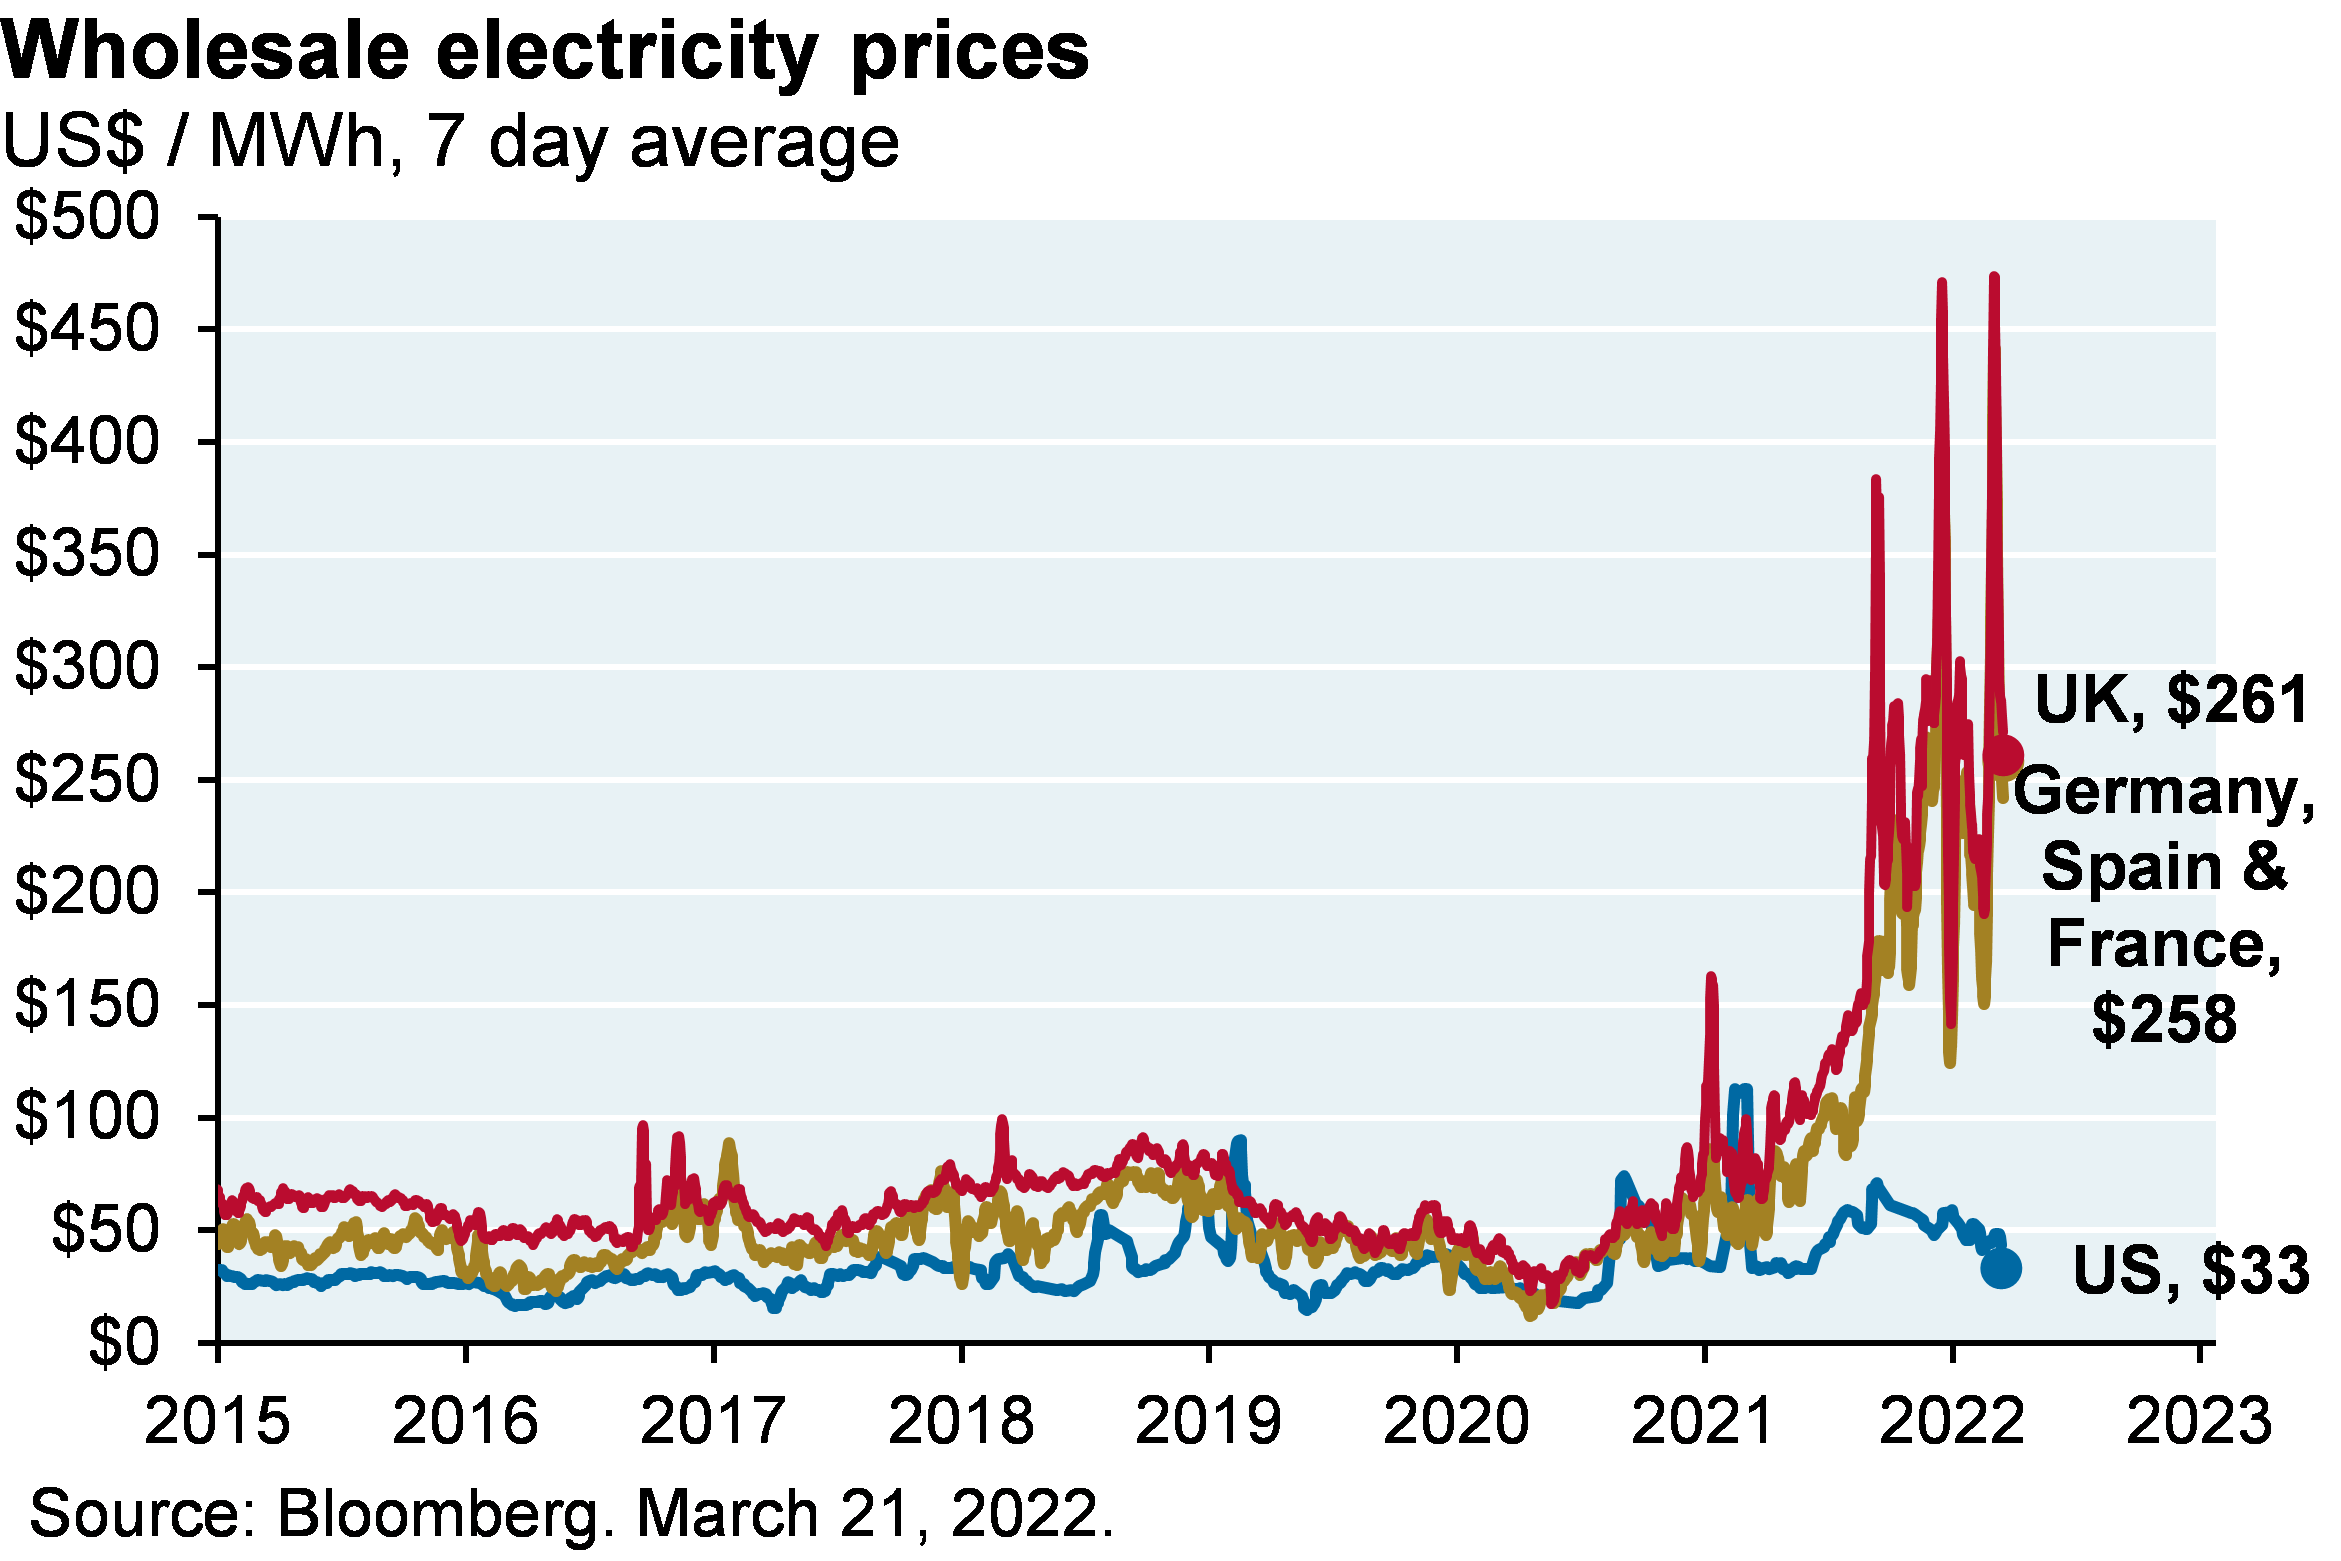 Line chart which shows wholesale electricity prices for the UK, US and an average of Germany, Spain and France prices. 